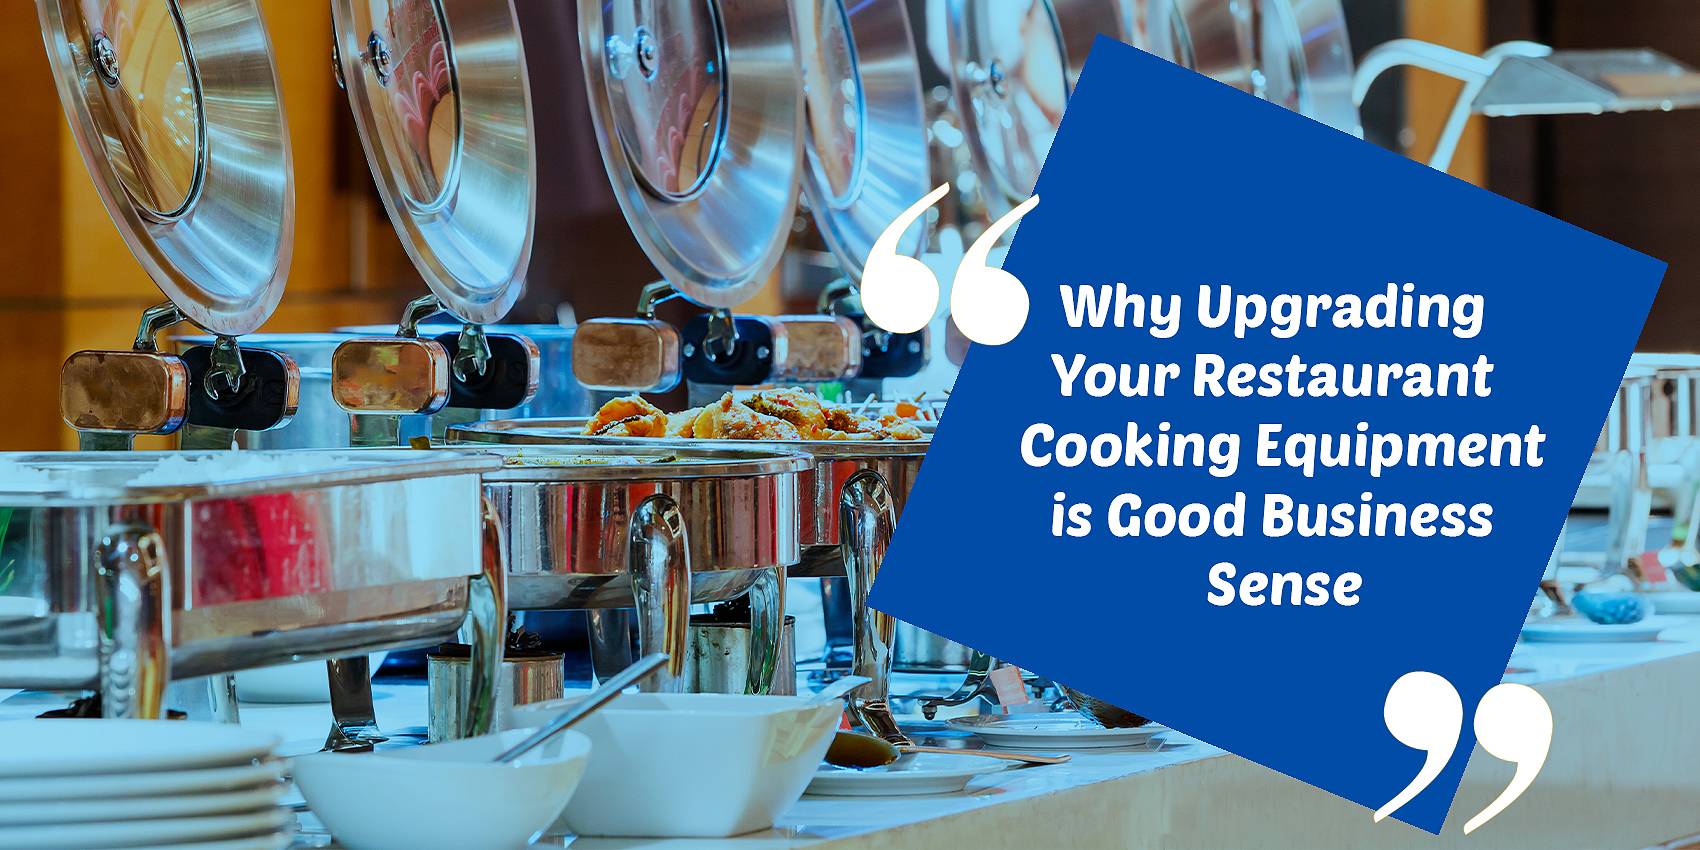 Upgrading your restaurant cooking equipment is good business sense